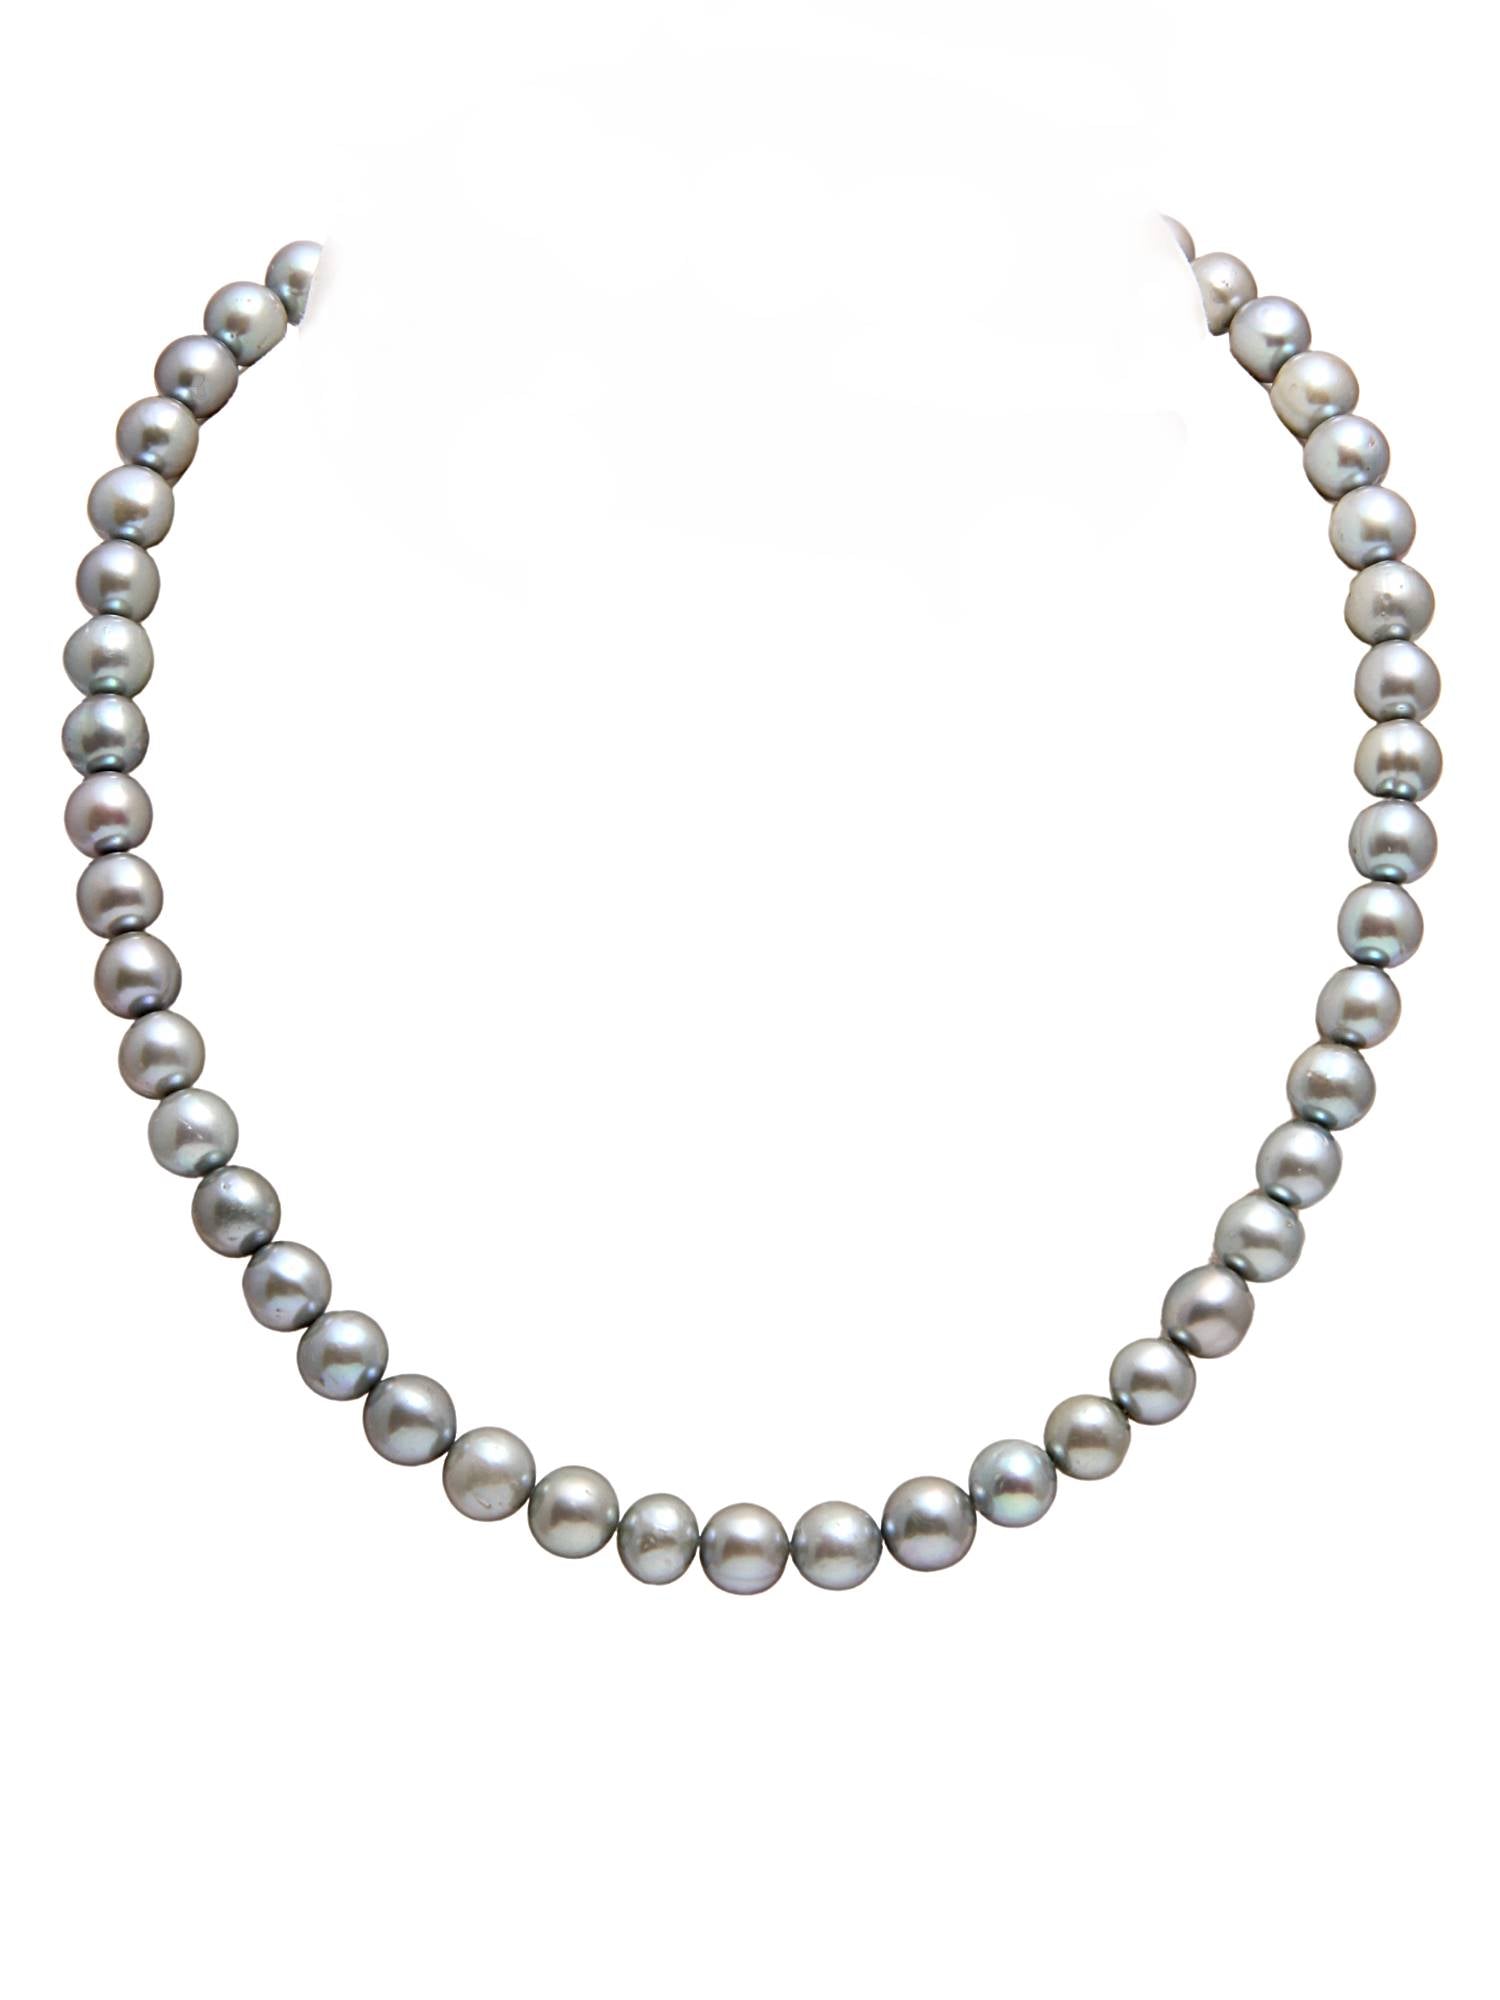 Round Silver Grey (8MM) Natural Freshwater Real Pearl Necklace with 92.5 Sterling Silver Clasp, 235 carats - (F1012)